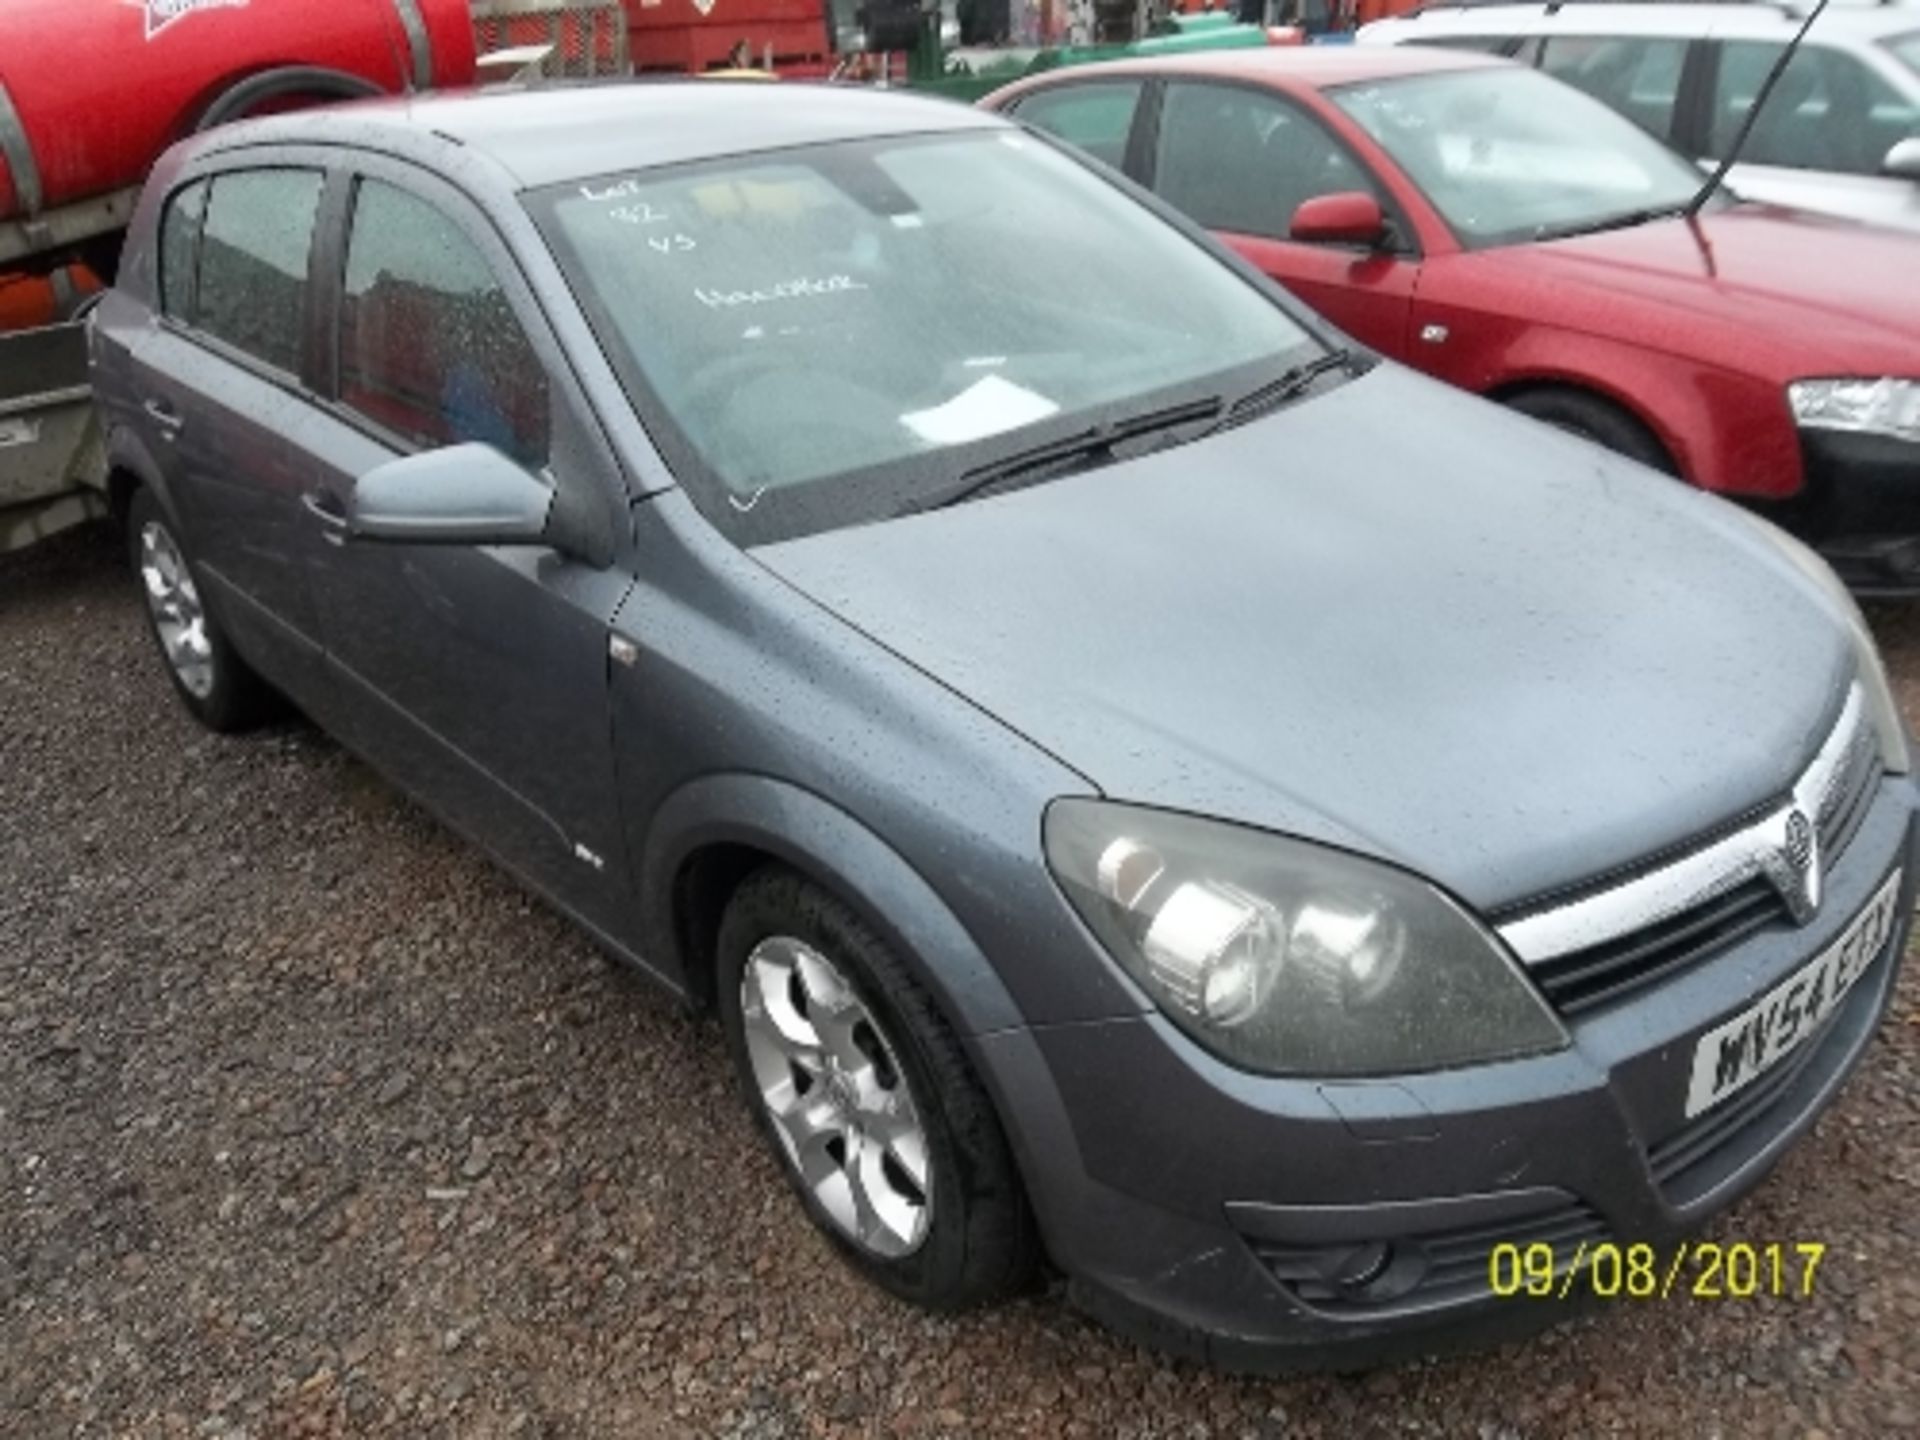 Vauxhall Astra SXI CDTI 100 - WV54 ETX Date of registration: 20.09.2004 1686cc, diesel, manual, grey - Image 2 of 4